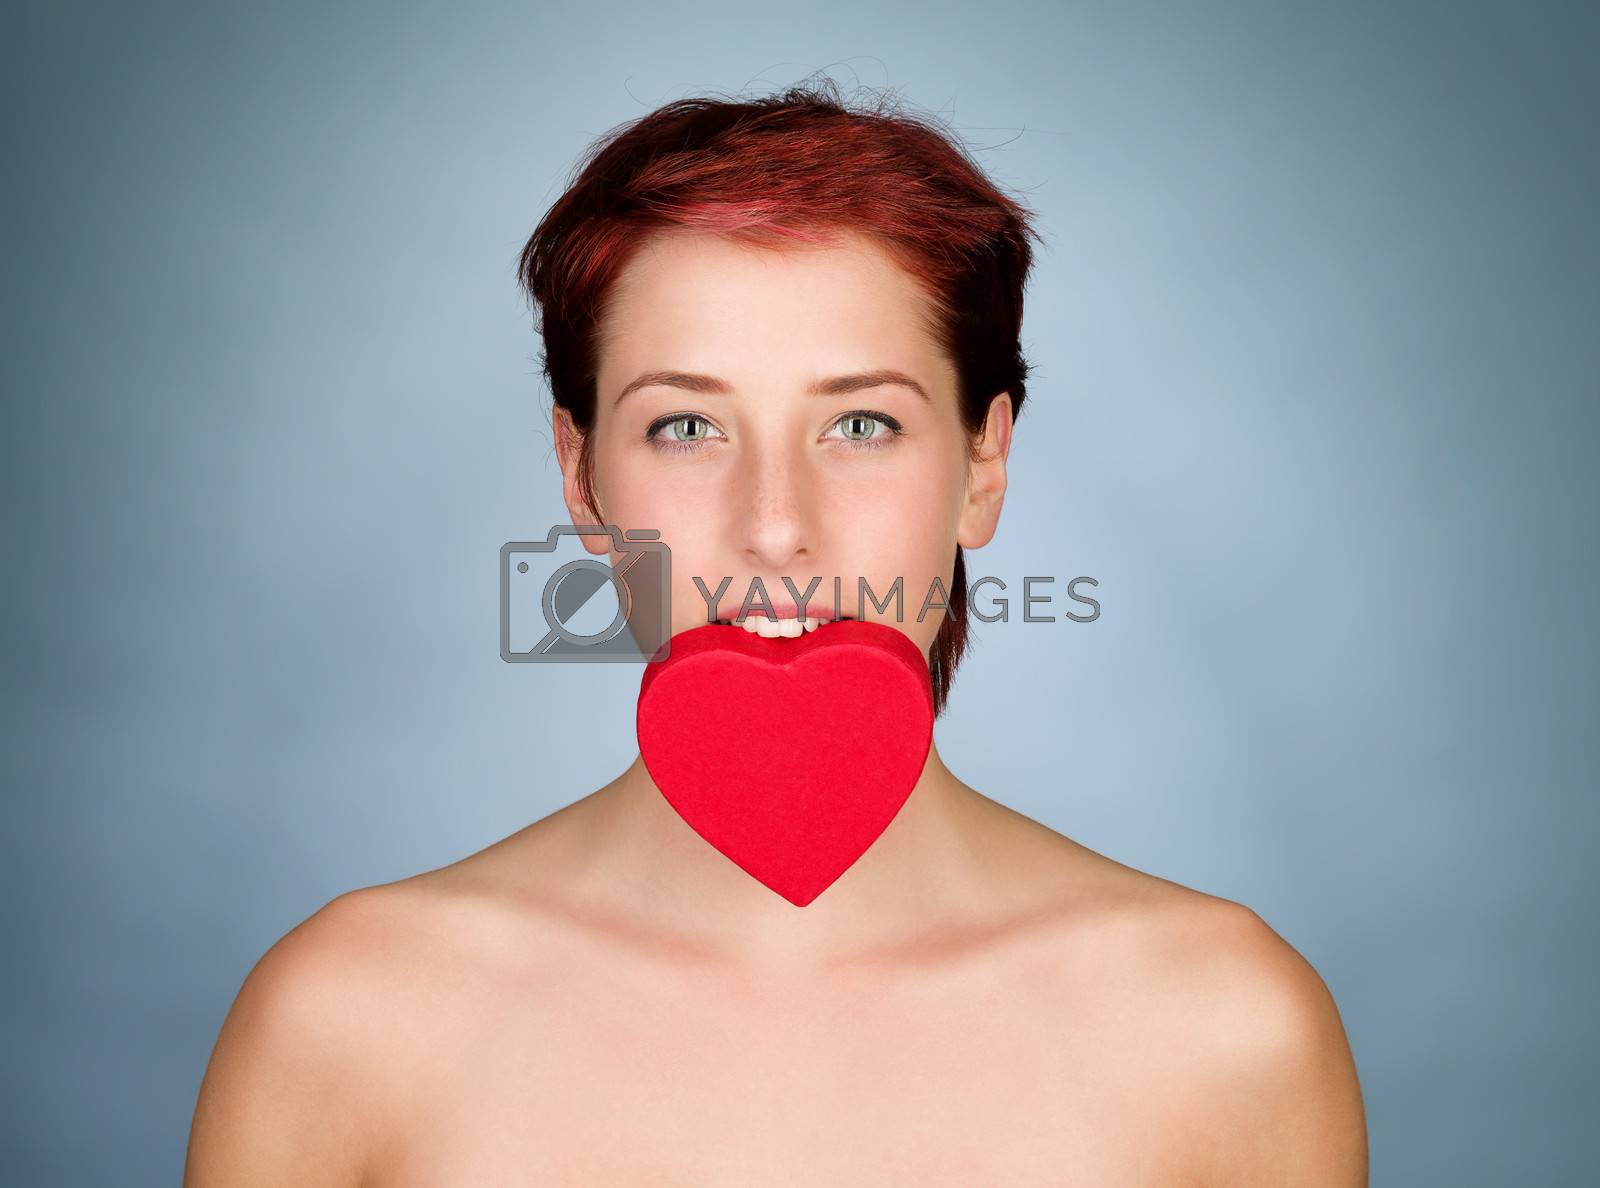 Royalty free image of holding heart with her teeth by RobStark